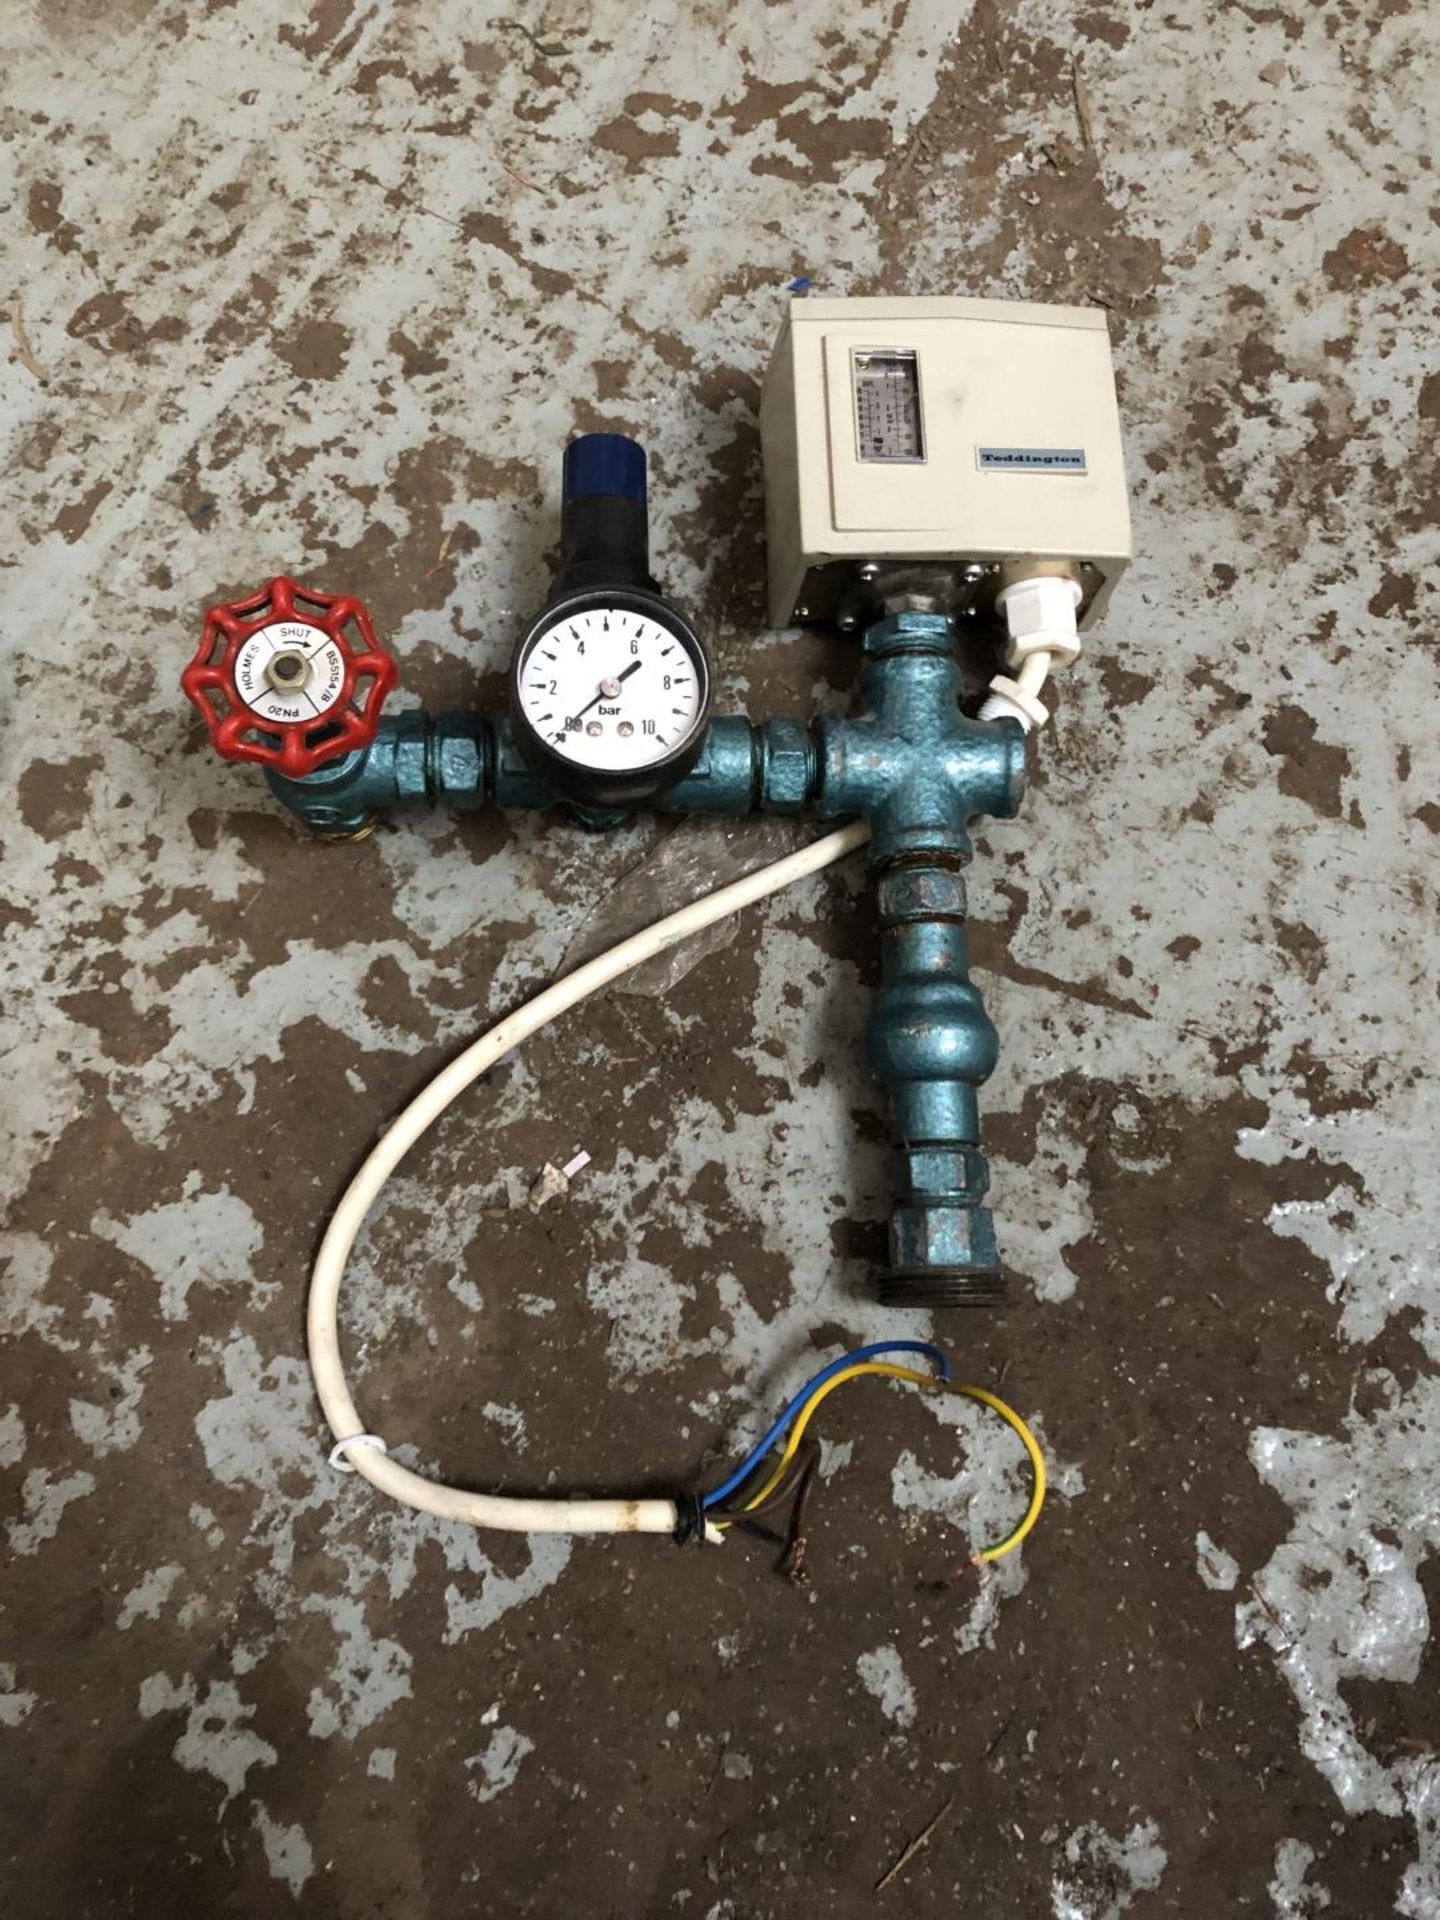 Lot Of Water Pressure Appliances - NP003 - CL344 - Location: Altrincham WA14 - Image 6 of 7